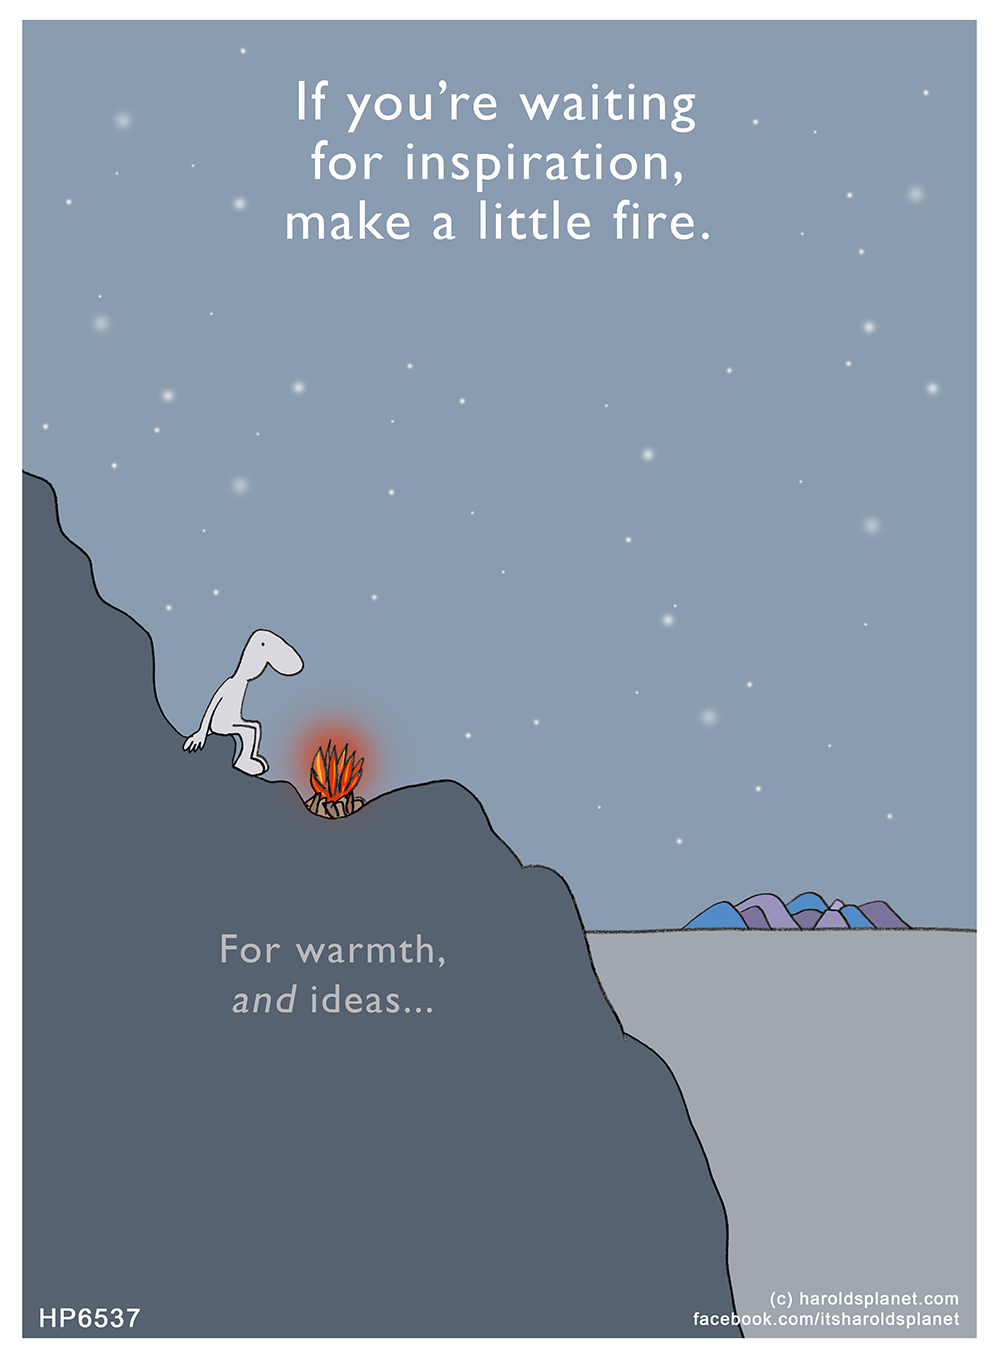 Harold's Planet: If you’re waiting for inspiration, make a little fire.